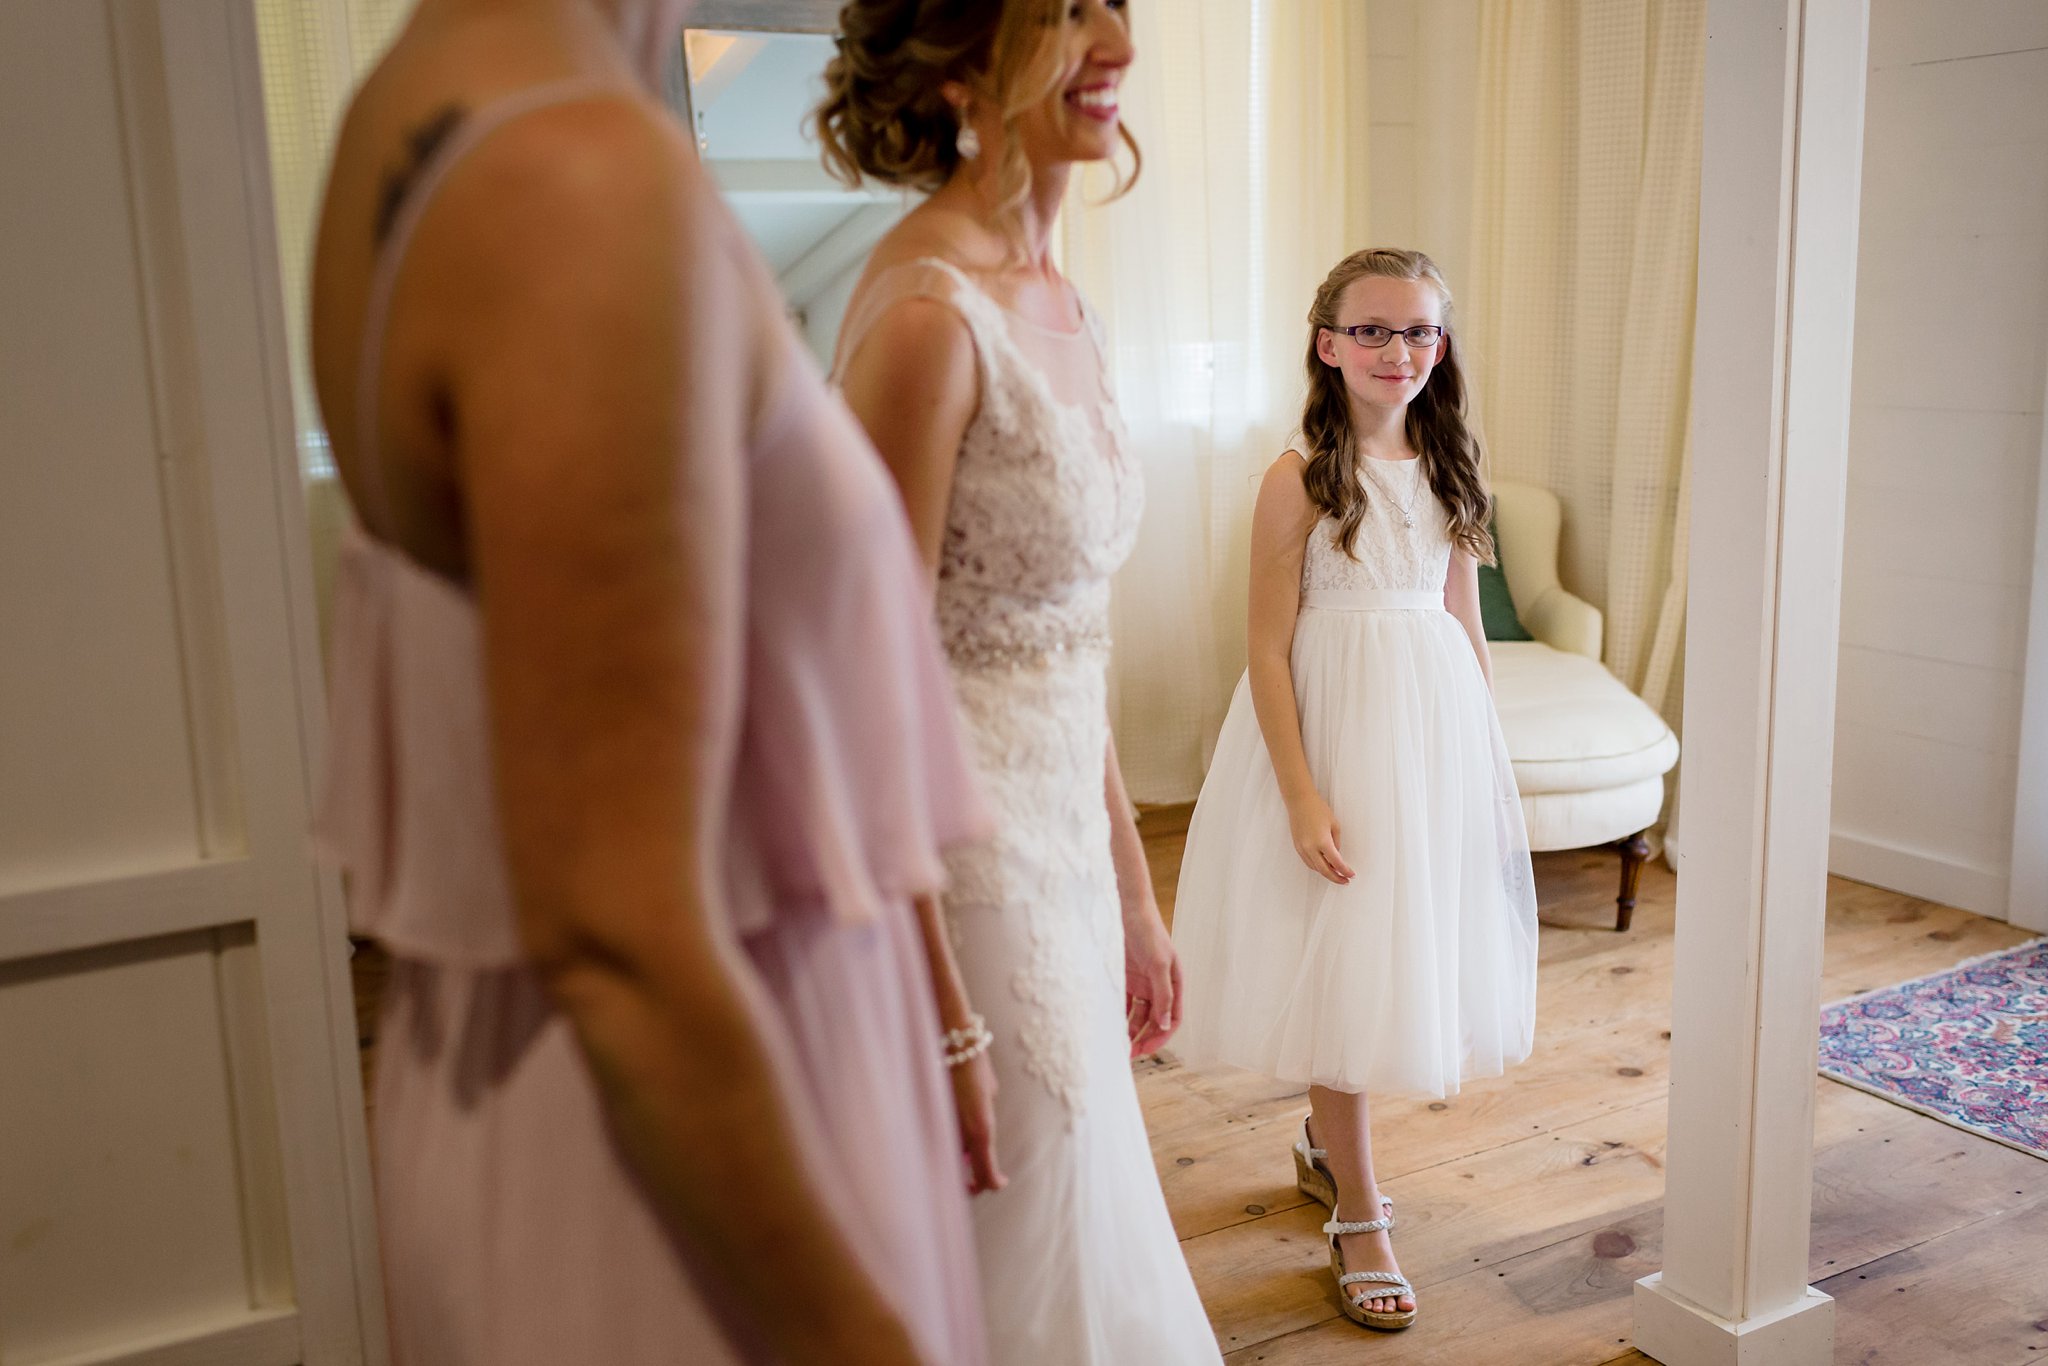 The flower girl enjoys the last moments before the ceremony starts in New Hampshire